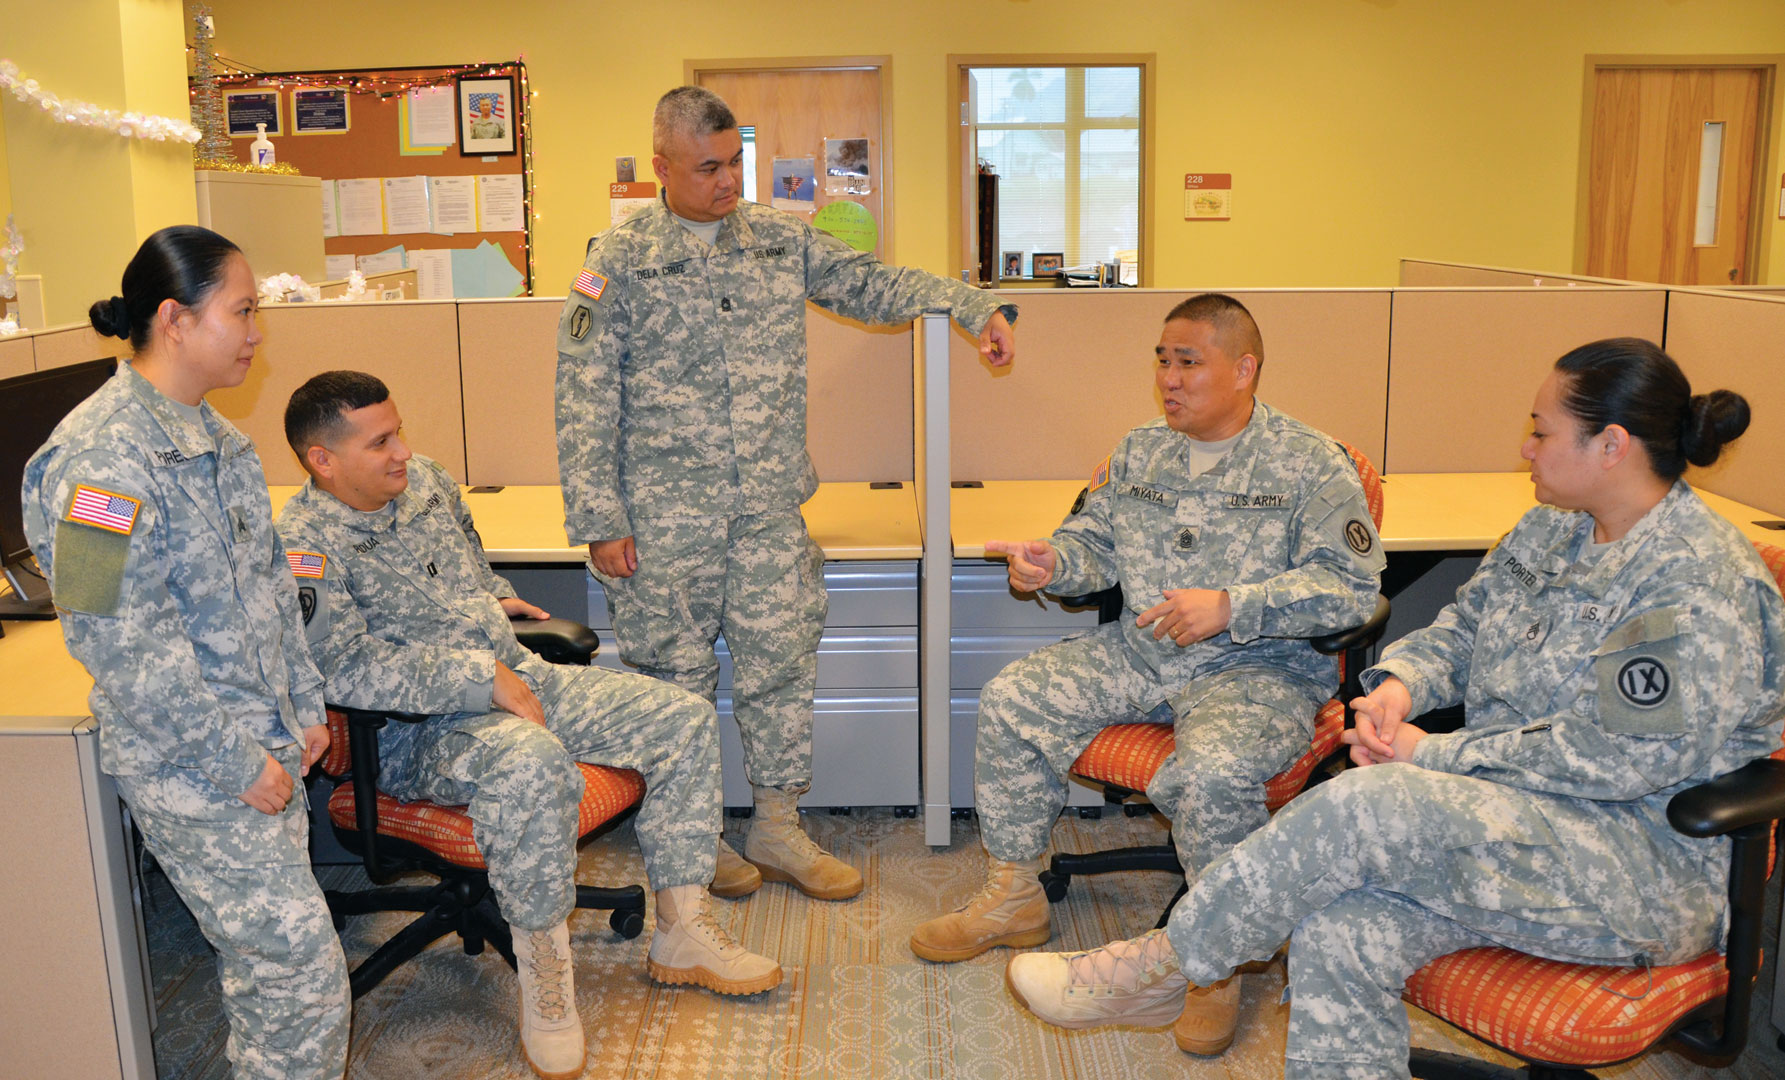 Command Sgt. Maj. John K. Miyata (seated center right) speaks with members of the 3302nd Mobilization Support Battalion’s staff in their offices at Fort Shafter, Hawaii. (Photo courtesy of Command Sgt. Maj. John K. Miyata)